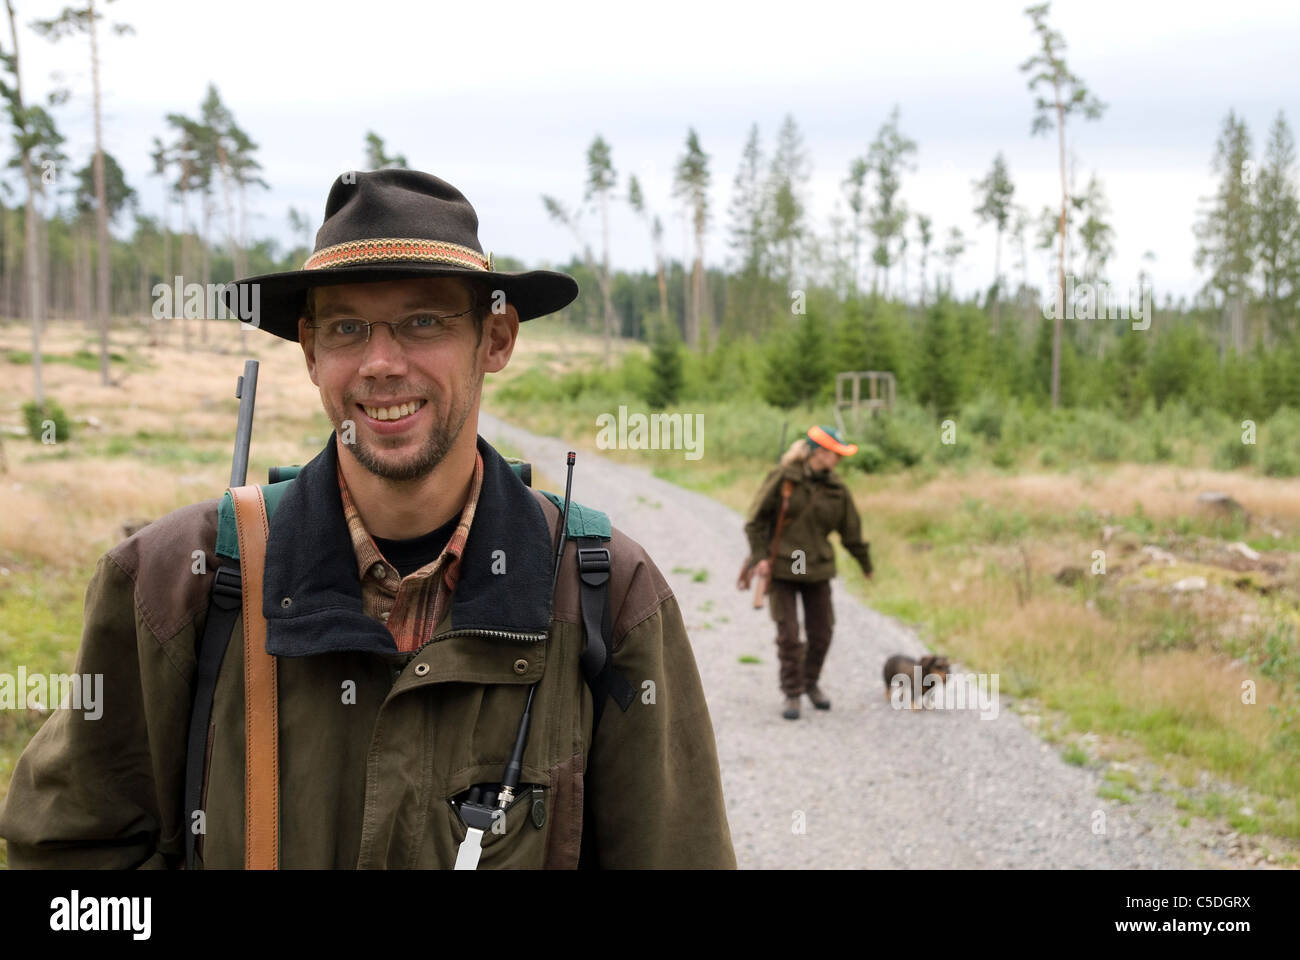 Portrait of a smiling hunter with friend and dog walking on country road in background Stock Photo